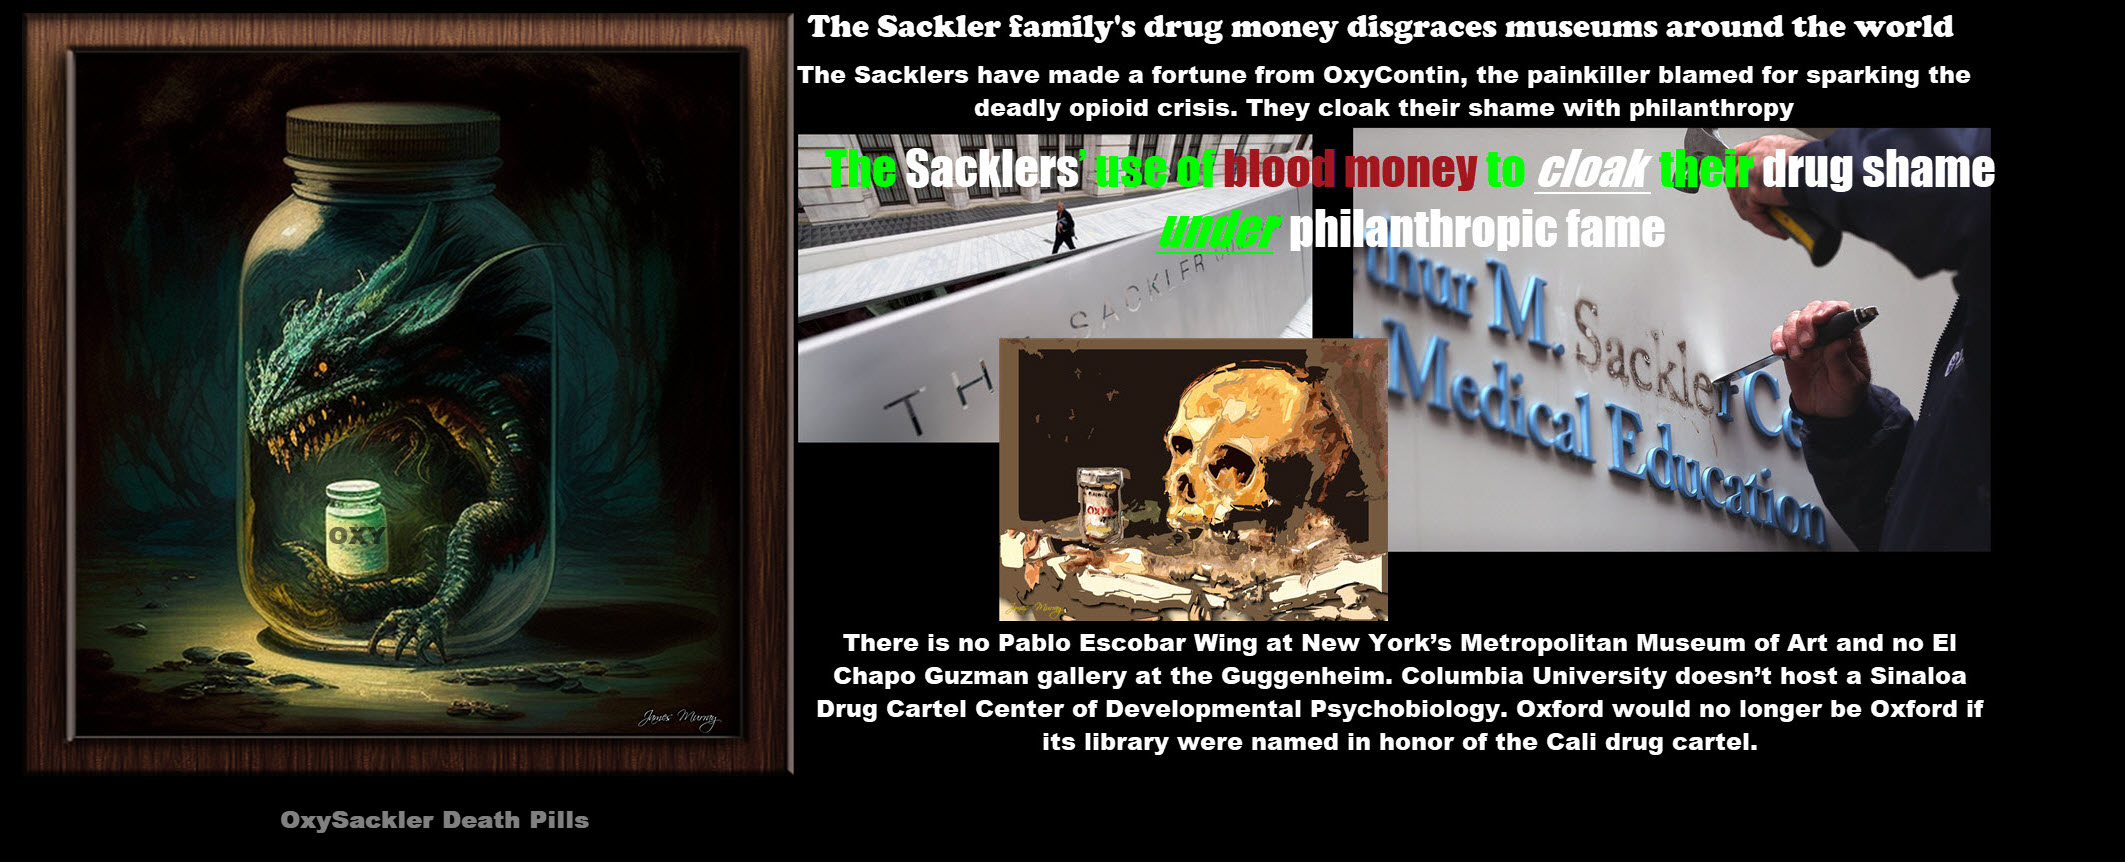 What parallels can be drawn between the Cali Drug Cartels, the Sinaloa, El Chapo Guzman, and Pablo Escobar, and the Sackler Family?